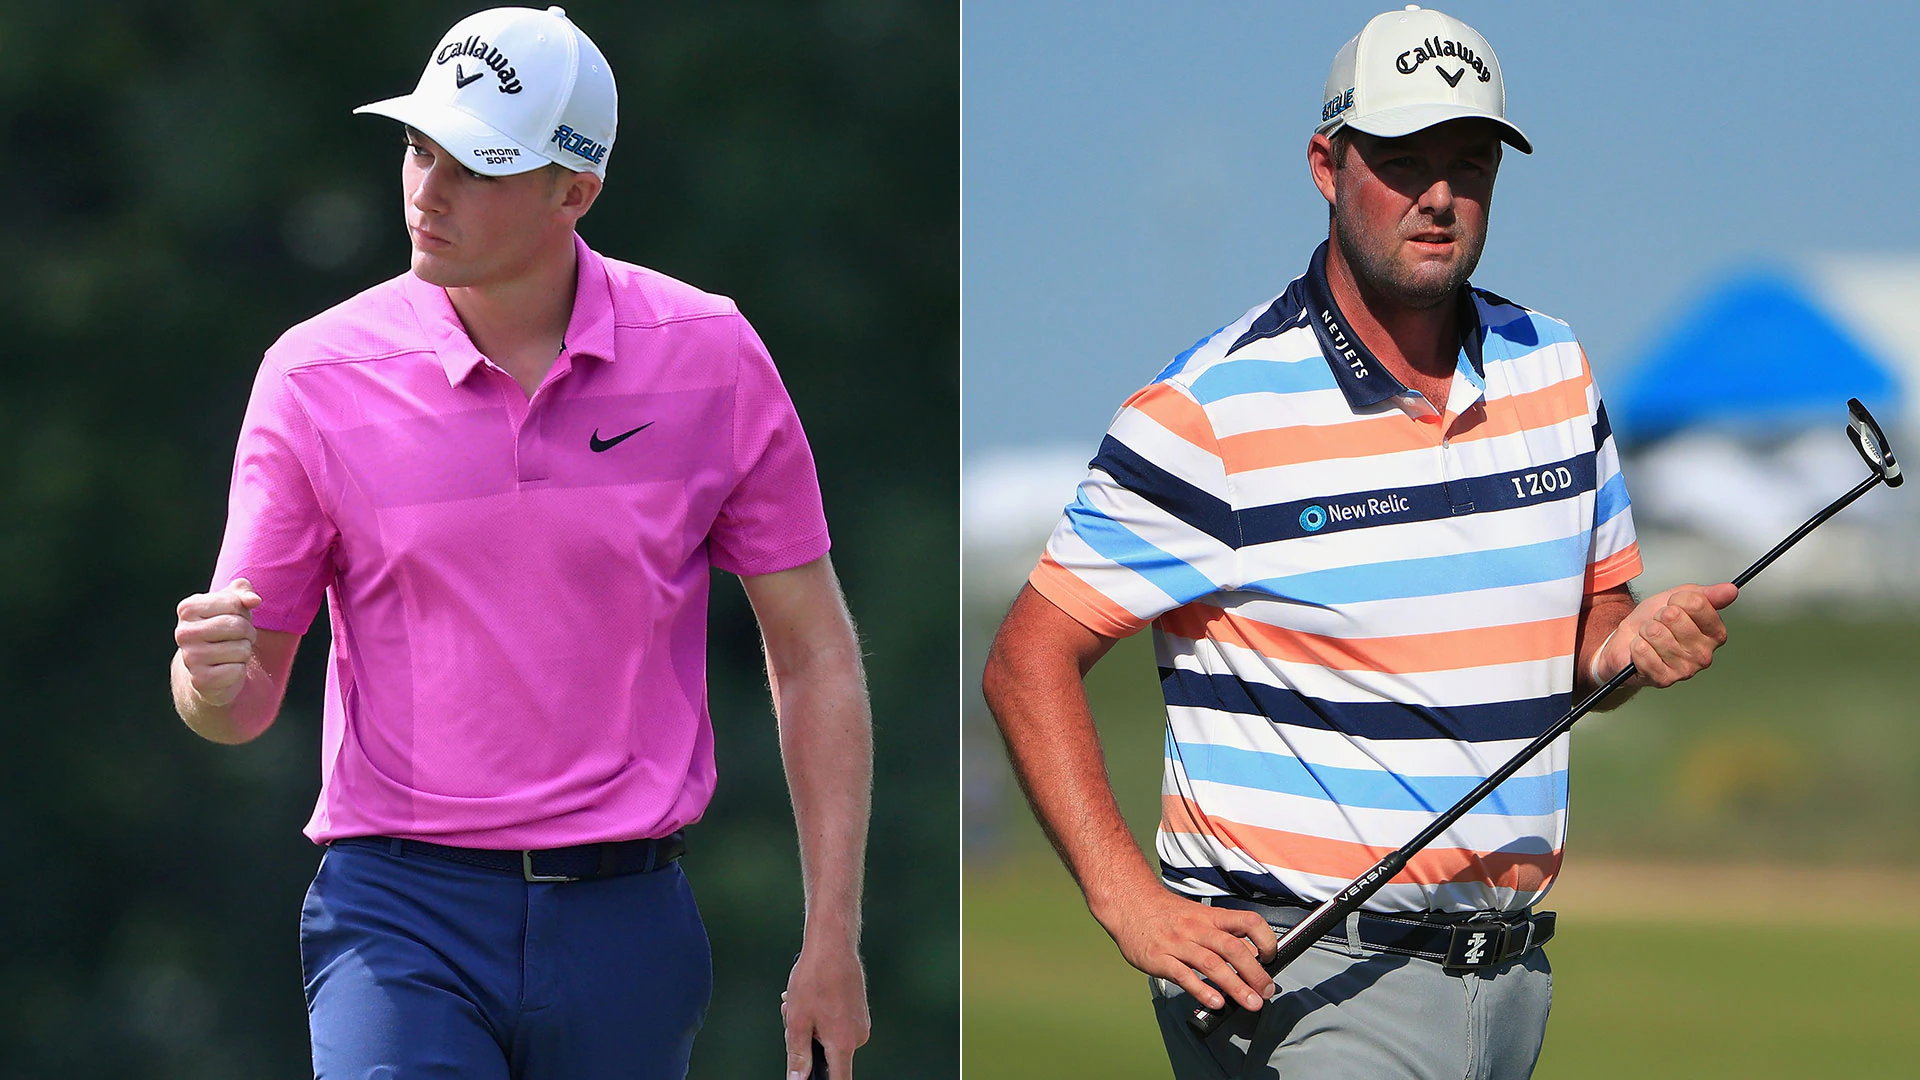 Wise (21) makes Leishman (34) feel a little old